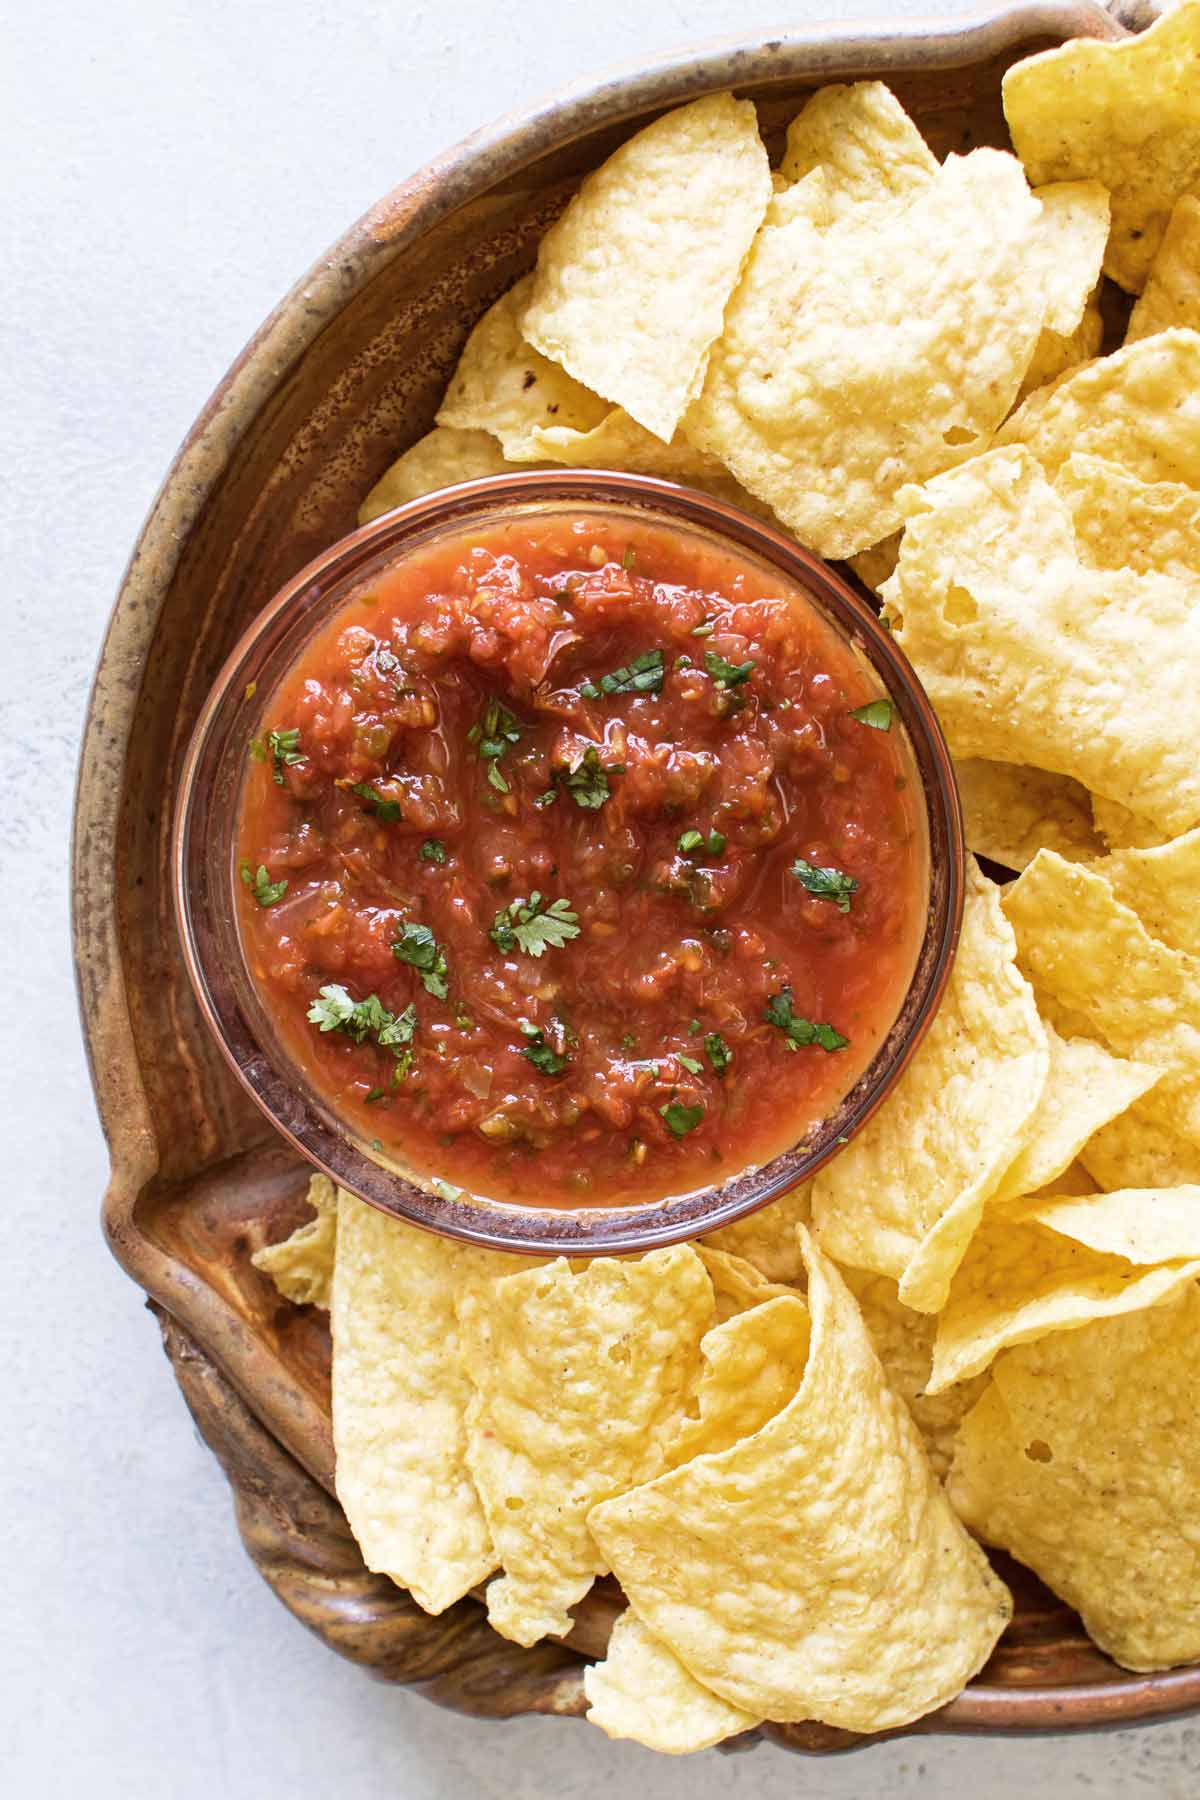 This homemade salsa is easy to make with fresh ingredients and has the best texture - not too thin, not too chunky, not too thick! Learn how to make it and you'll skip the store-bought kind.